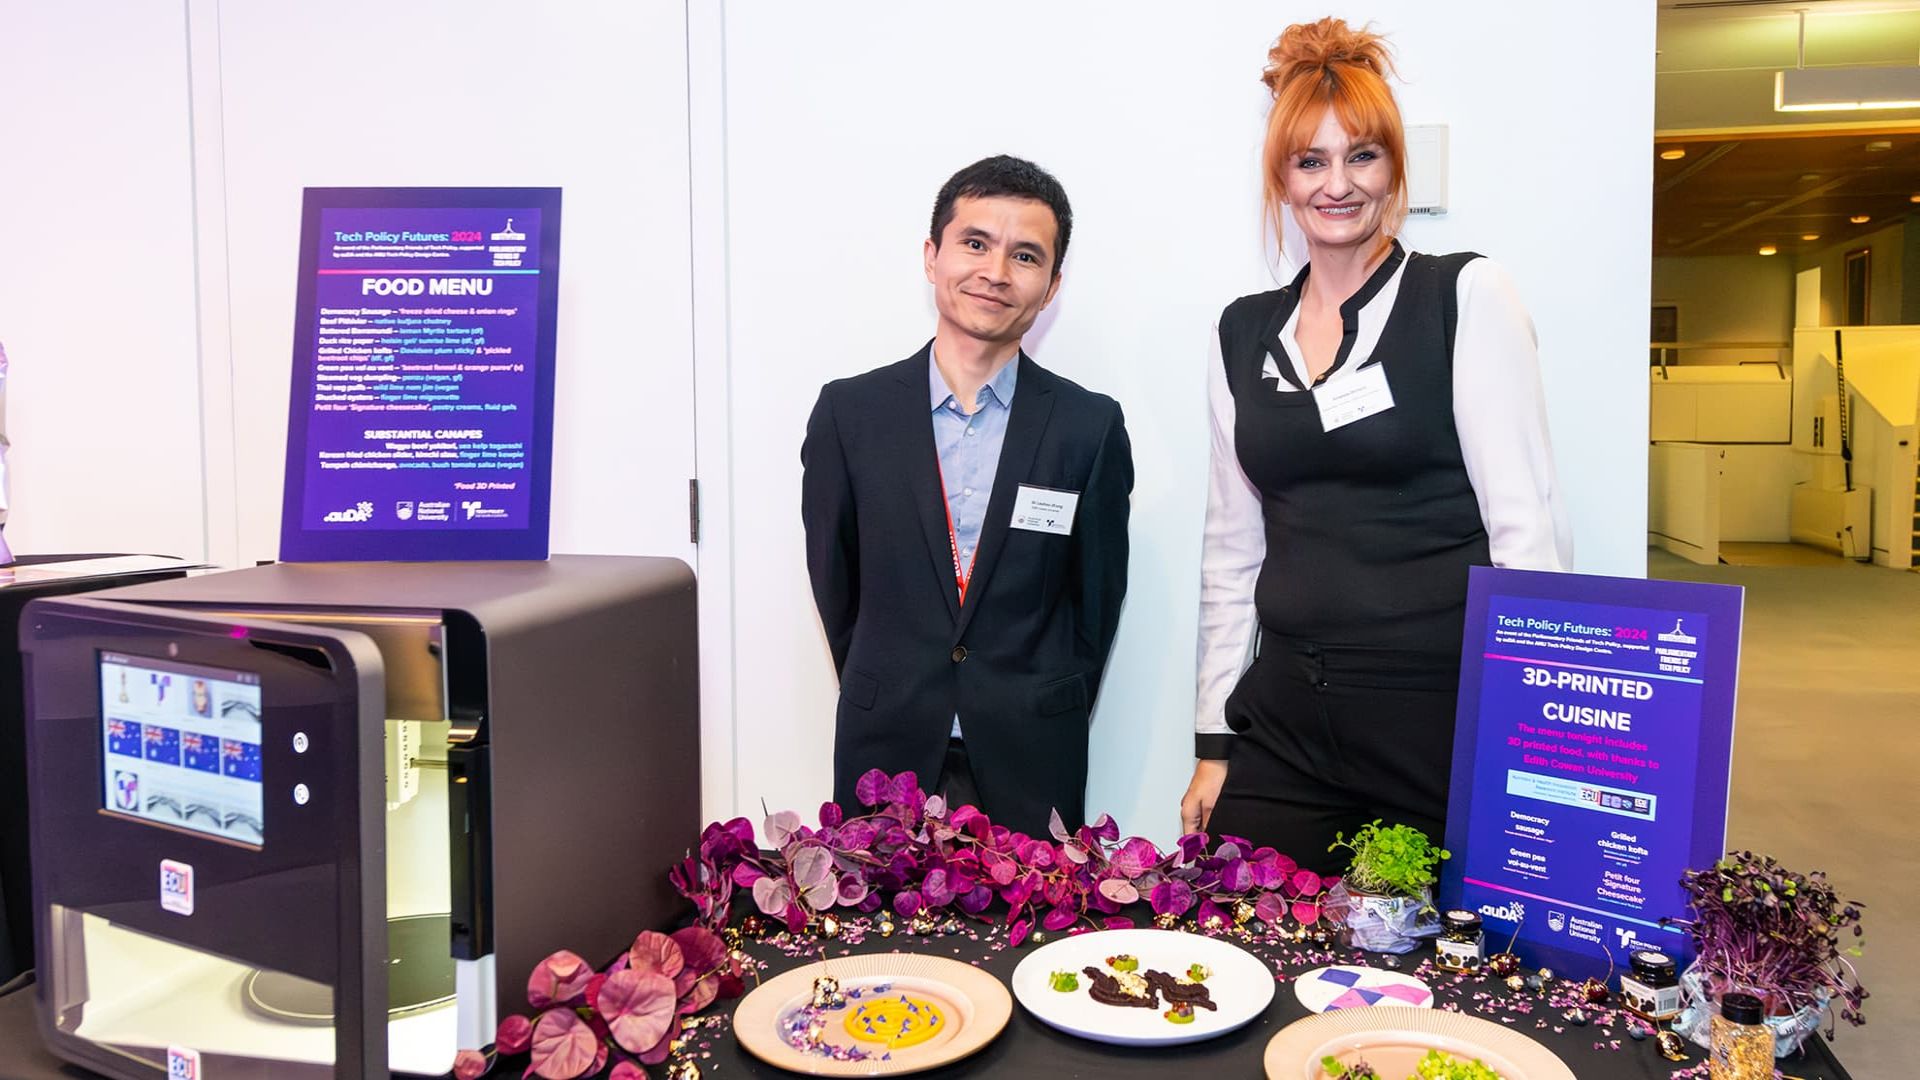 Dr Liezhou Zhong and Chef Amanda Orchard stand beside a table displaying dishes and a 3D food printer at the tech Policy Futures event.